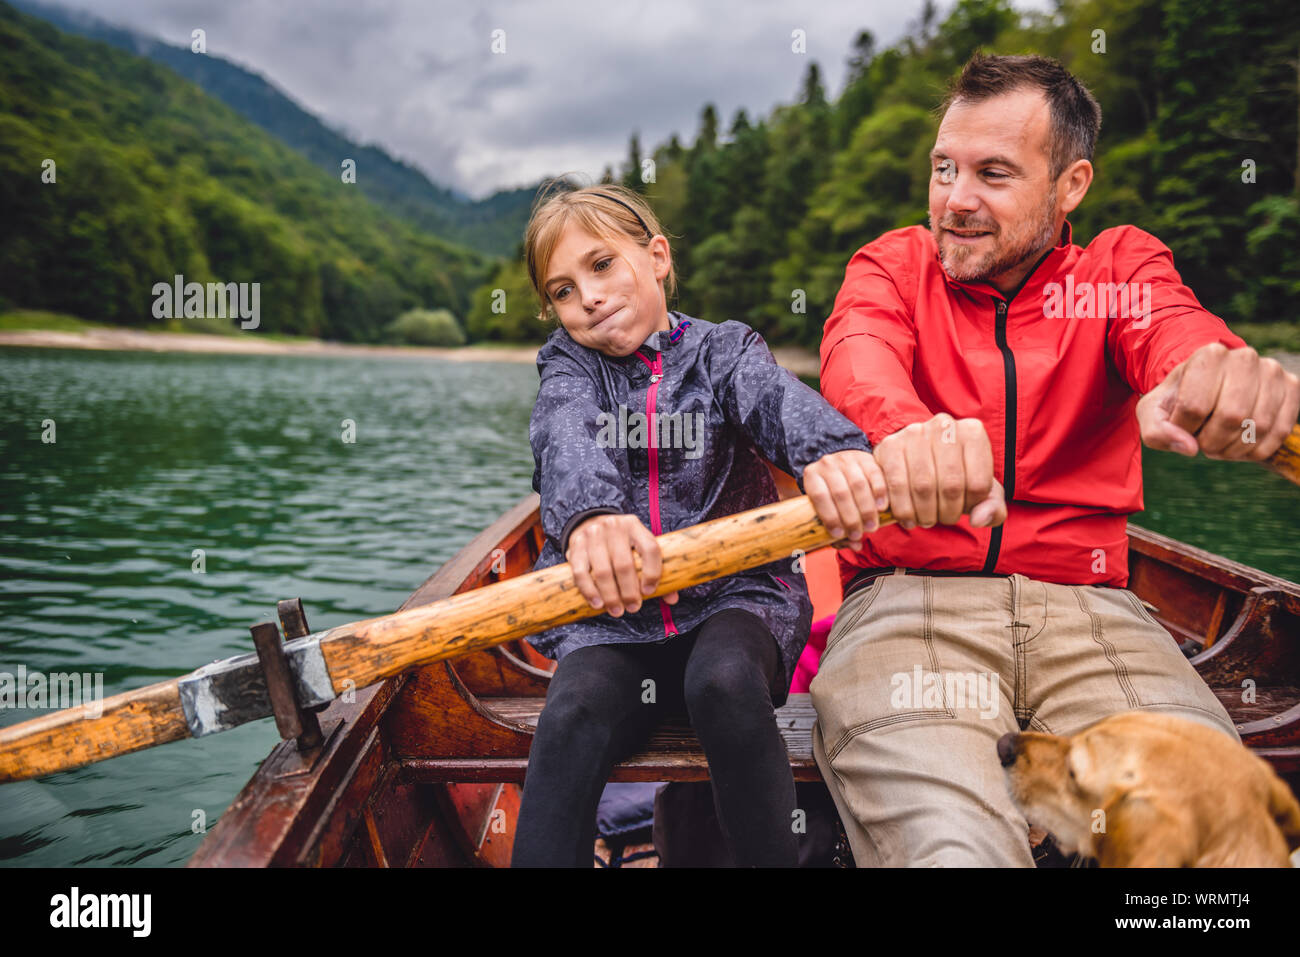 Father and daughter with a small yellow dog rowing a boat on a mountain lake Stock Photo